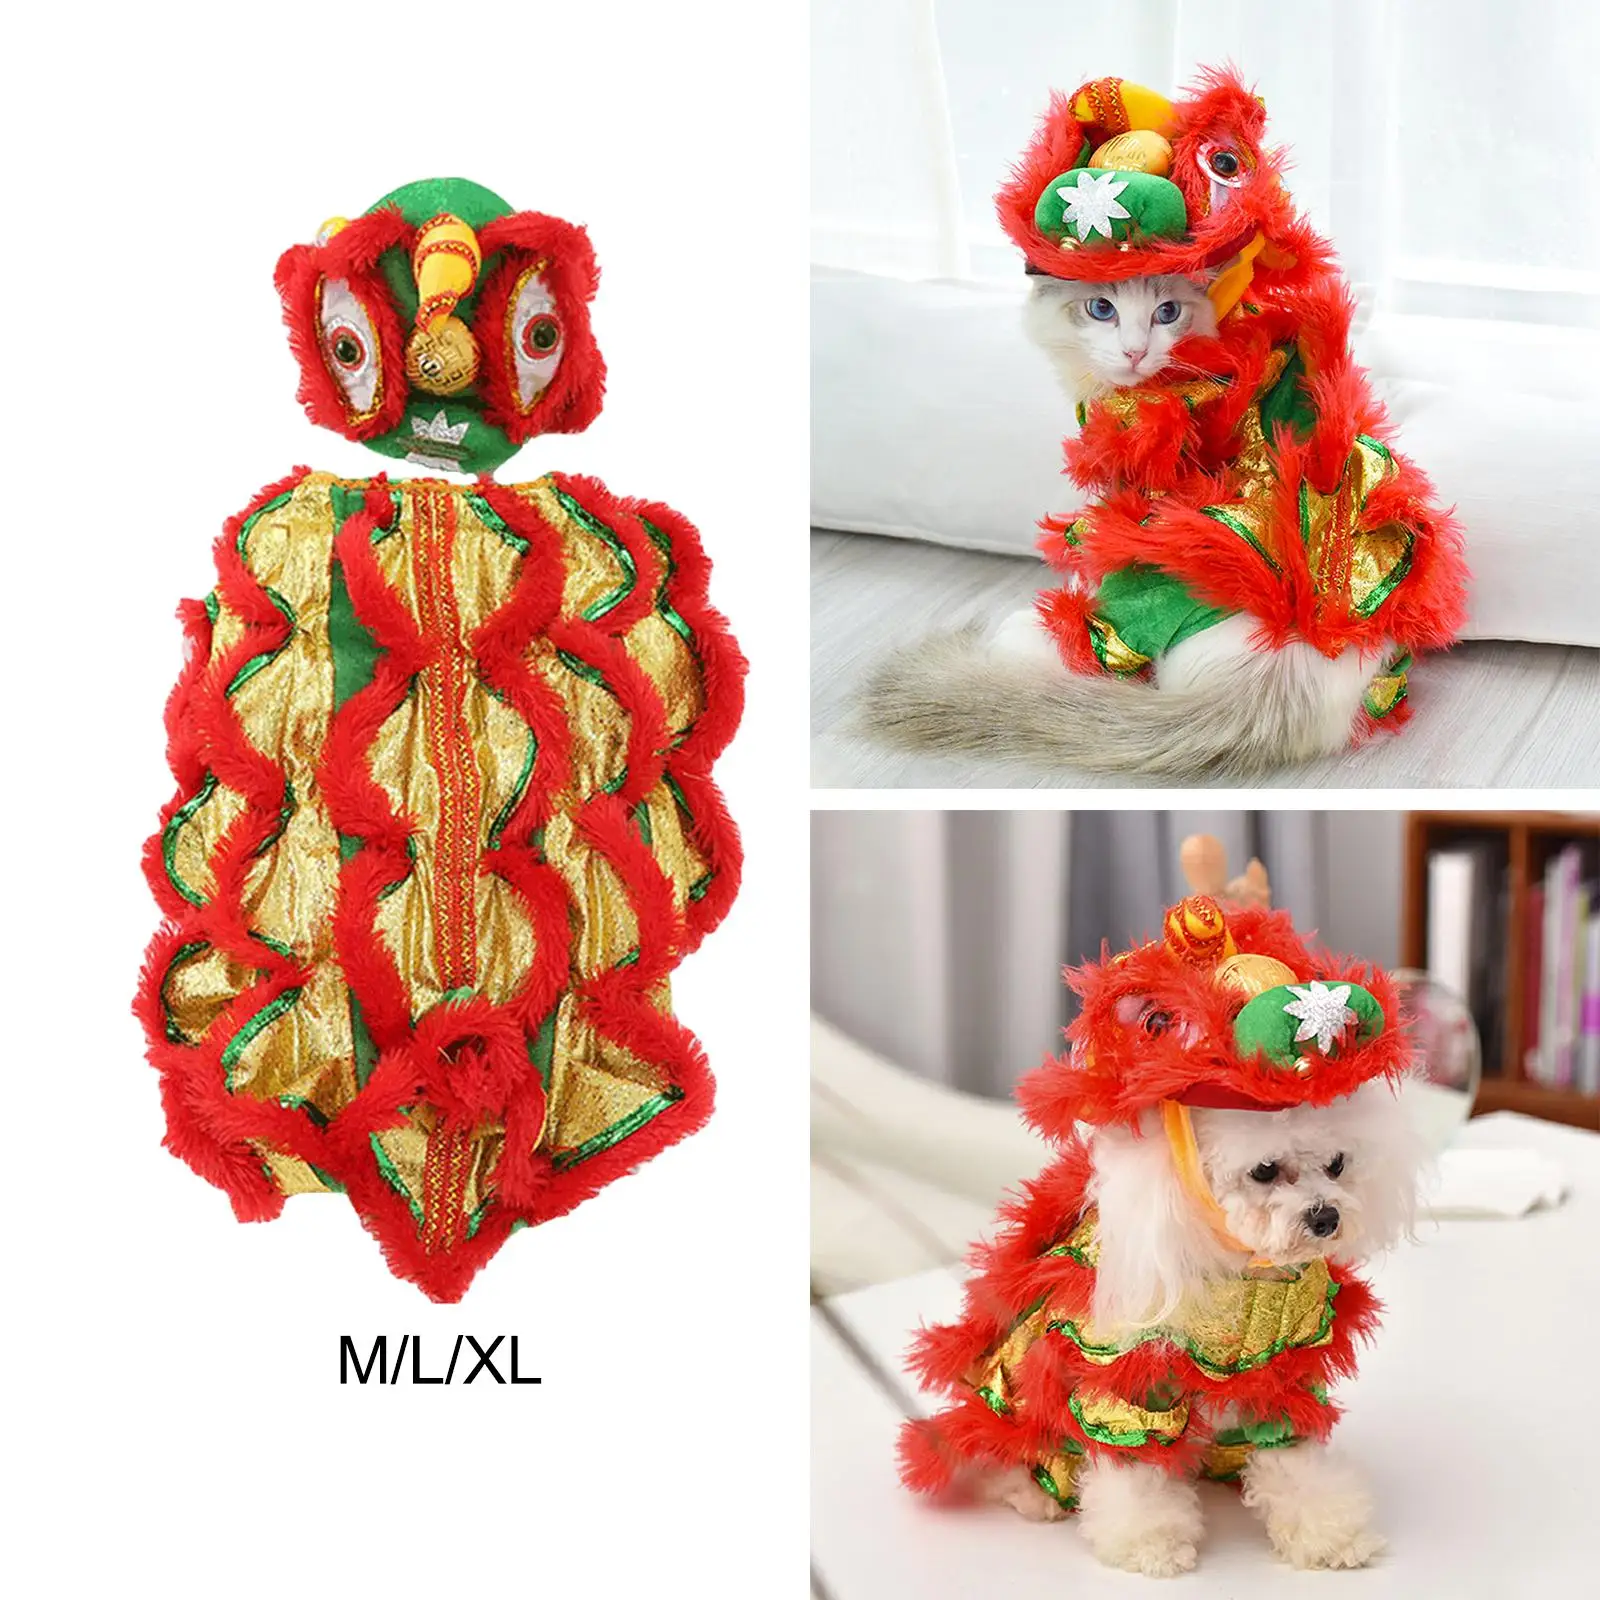 Winter Puppy Costume Cute Coat Jacket Lightweight Soft Chinese Spring Festival Hoodies Coat for Cosplay Stage Performance Party